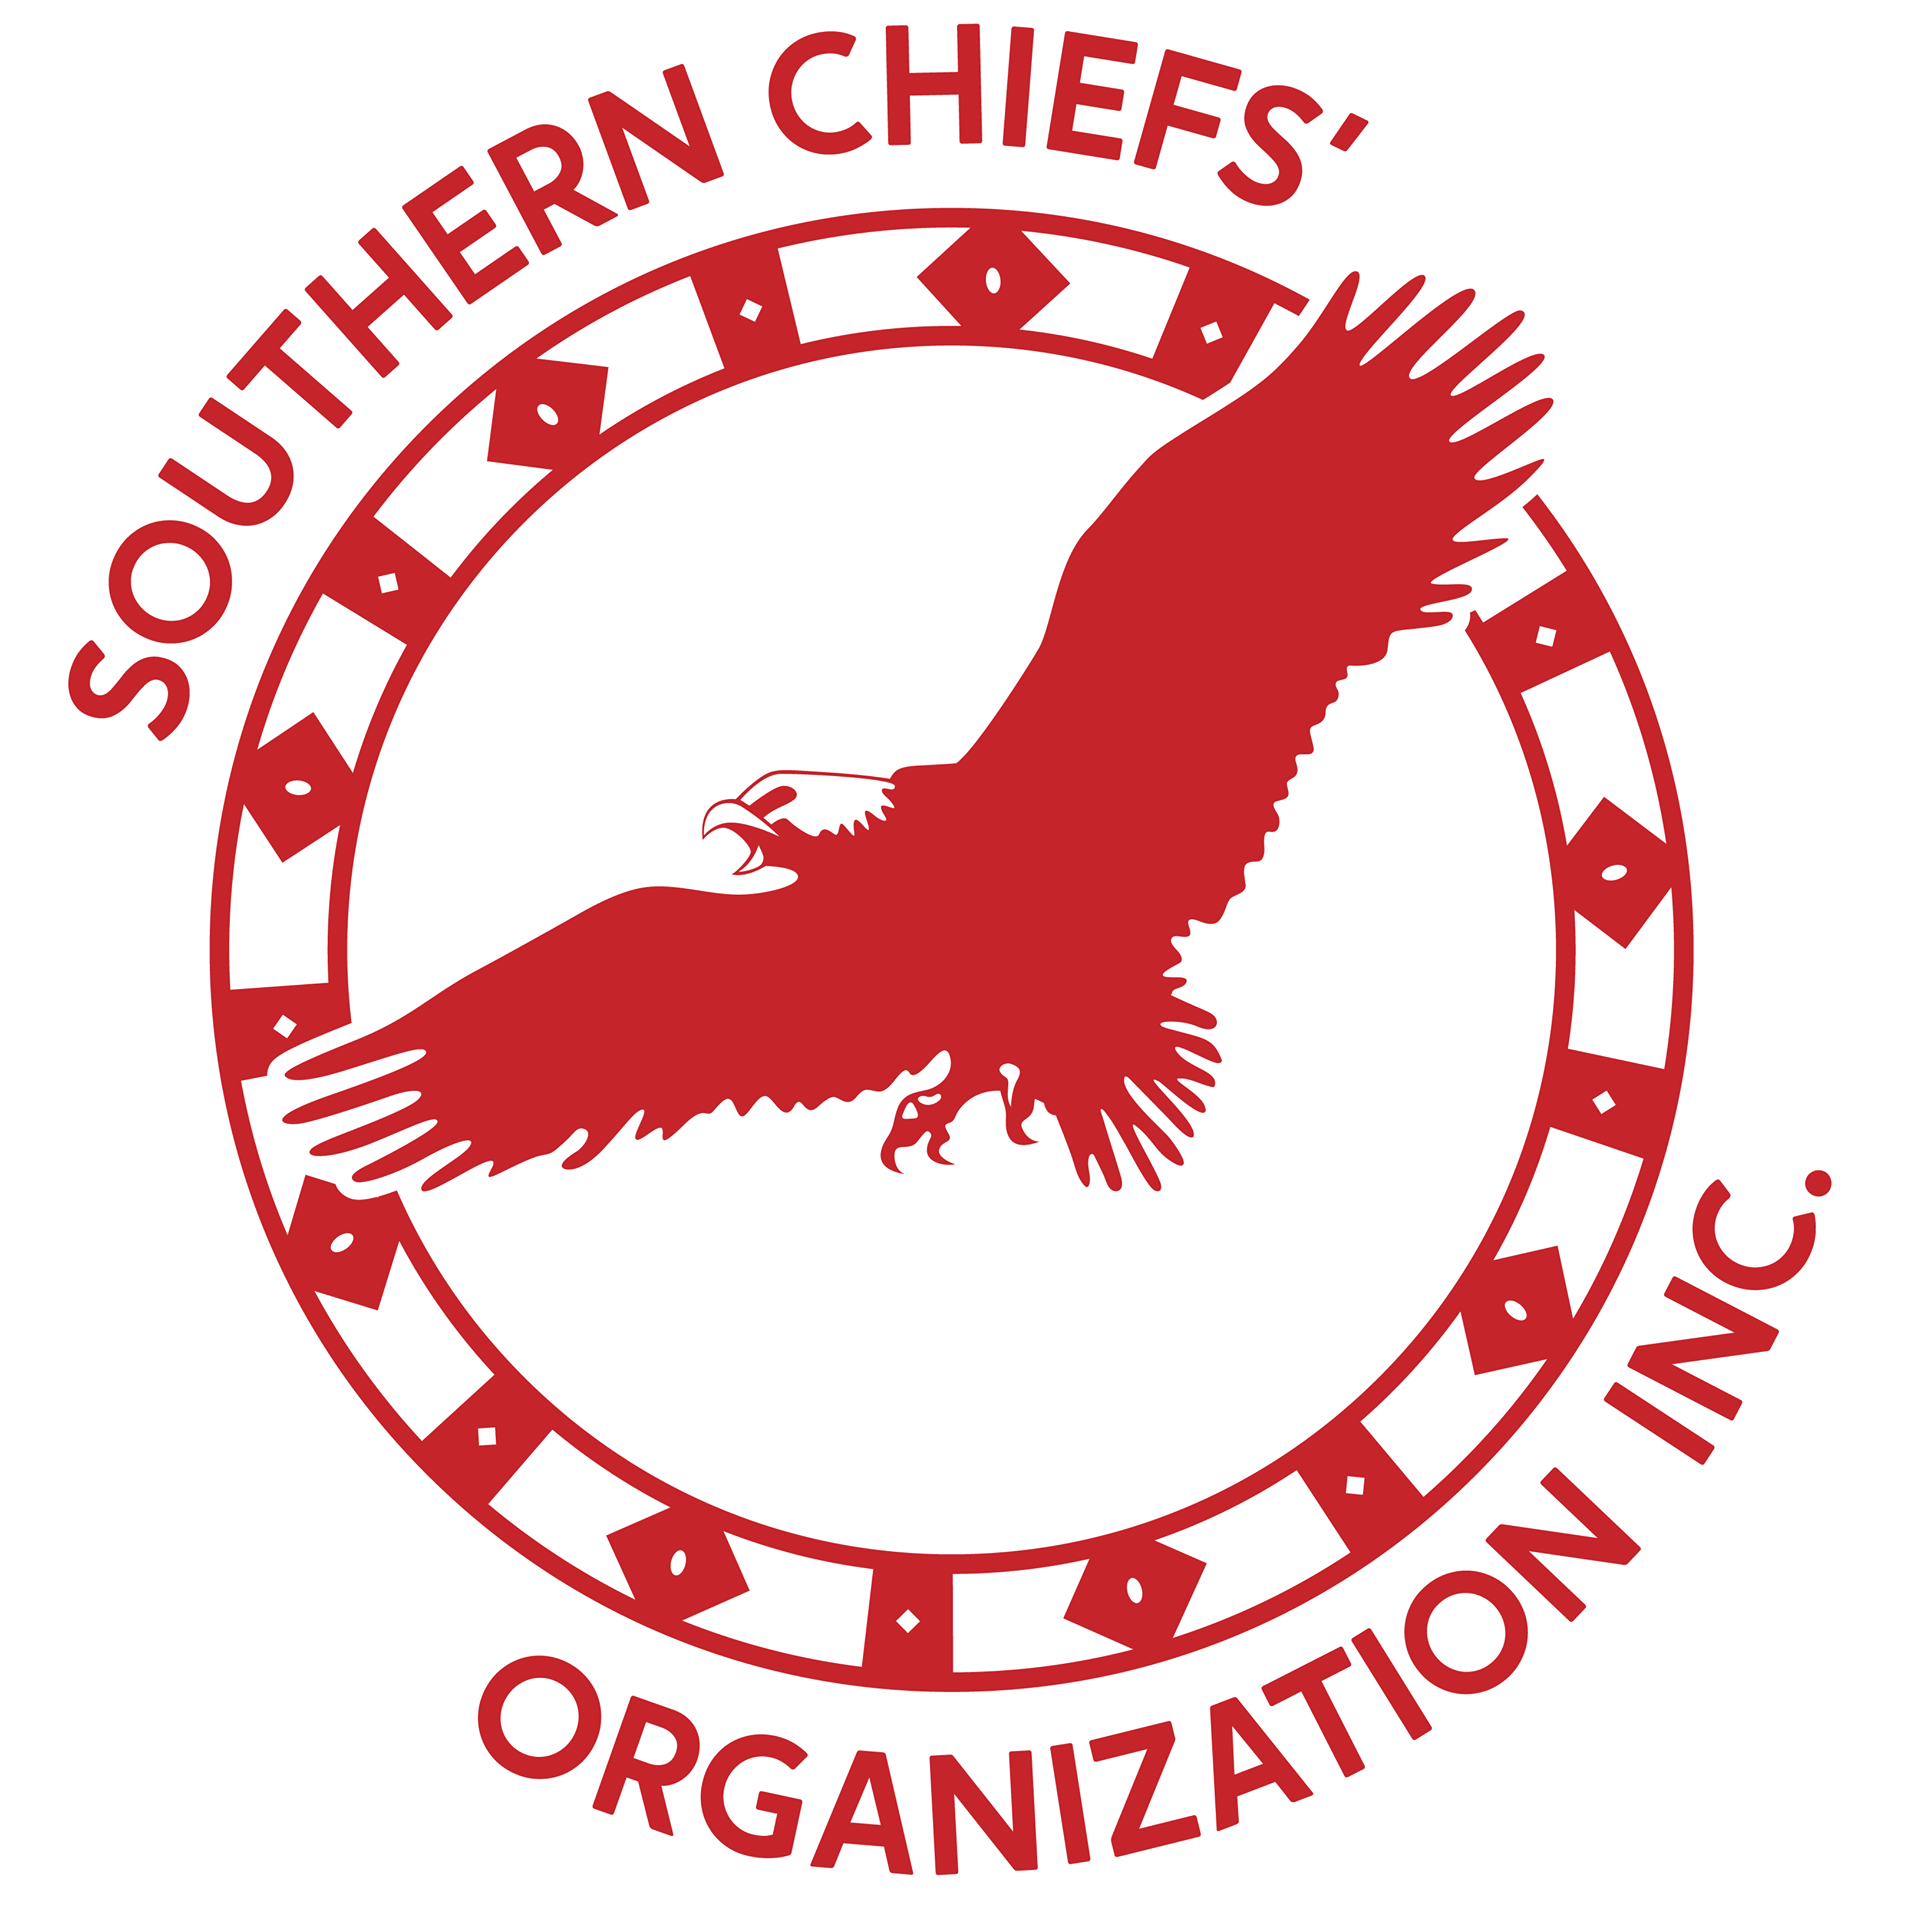 Southern Chiefs’ Organization launches a 24-hour Mobile Crisis Response Team program